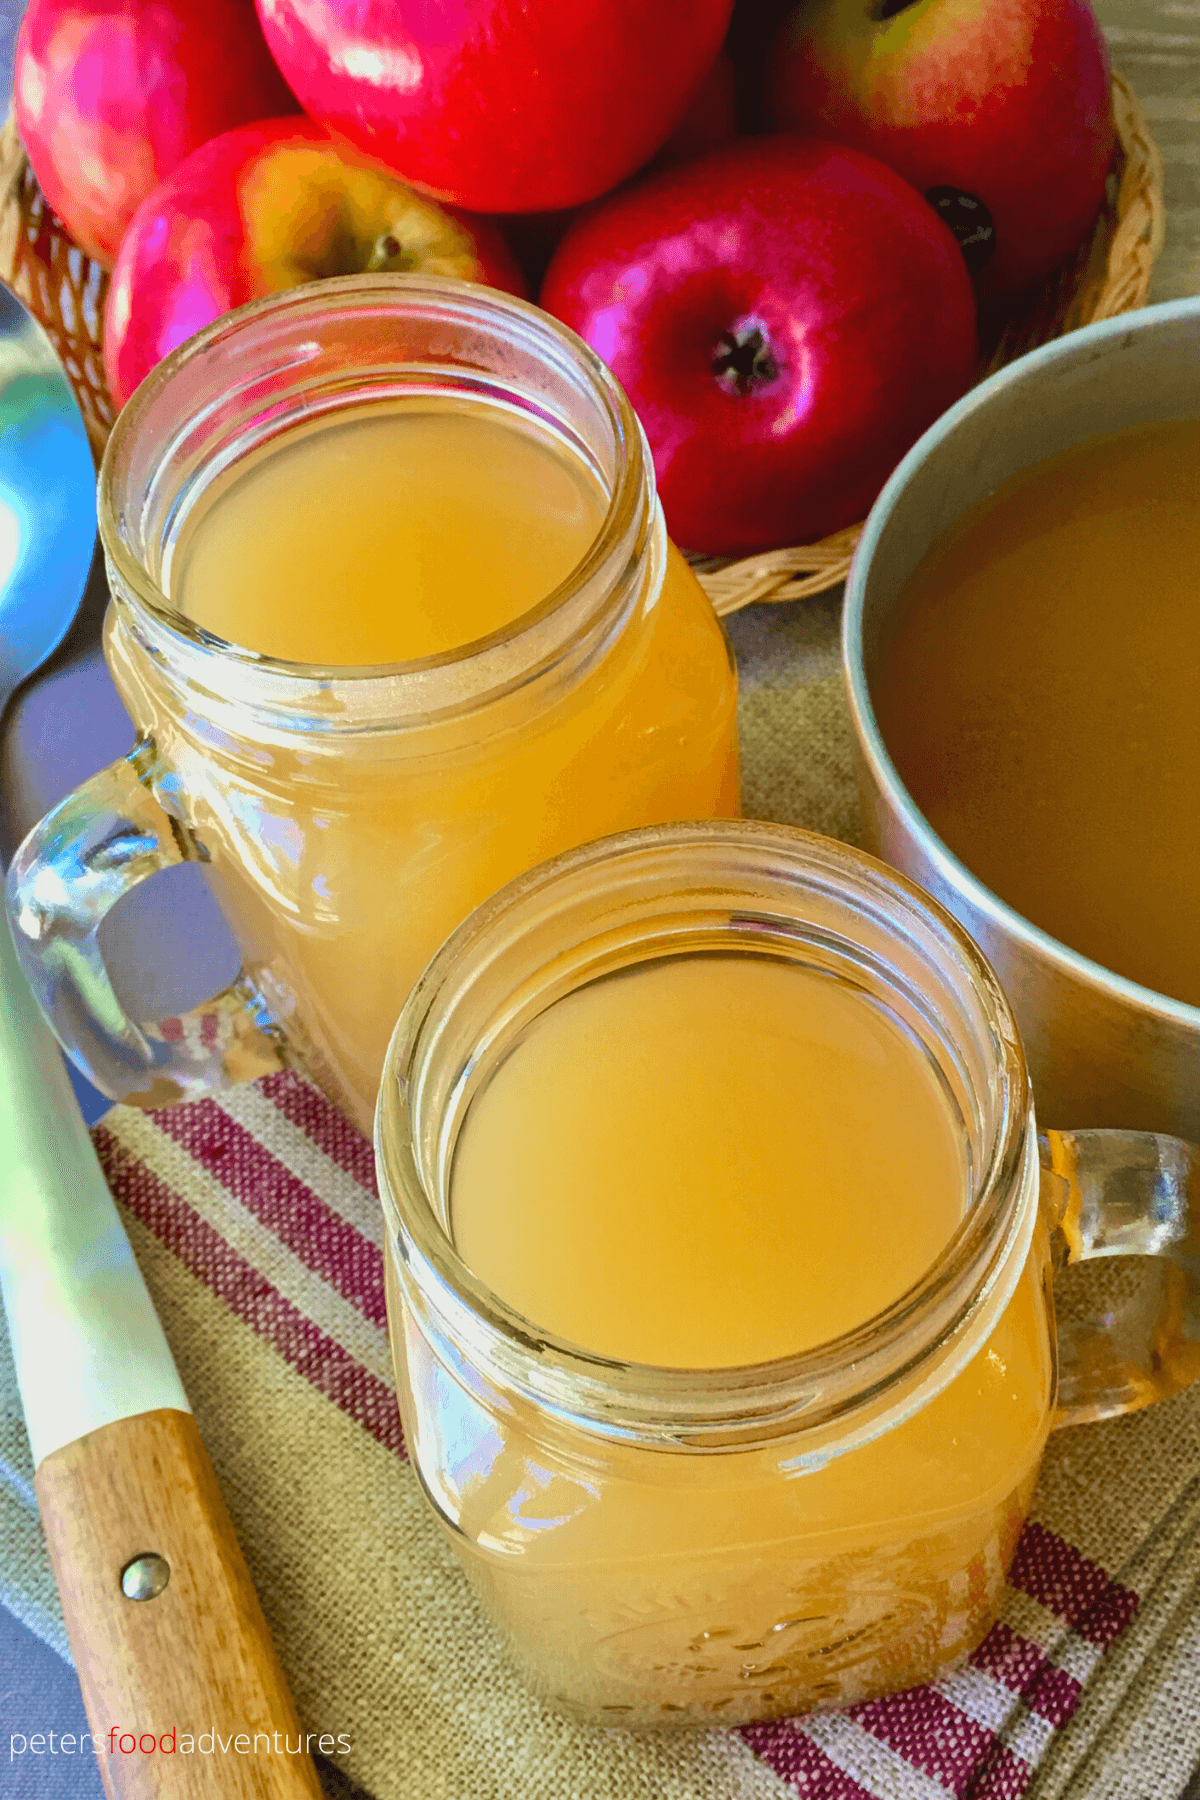 Hot Spiced Apple Cider - the aroma fills your whole house with this classic American spiced drink, especially popular during Thanksgiving and Christmas. This non-alcoholic mulled apple cider recipe is perfect for a cold chilly night, made with naturally cloudy apple juice